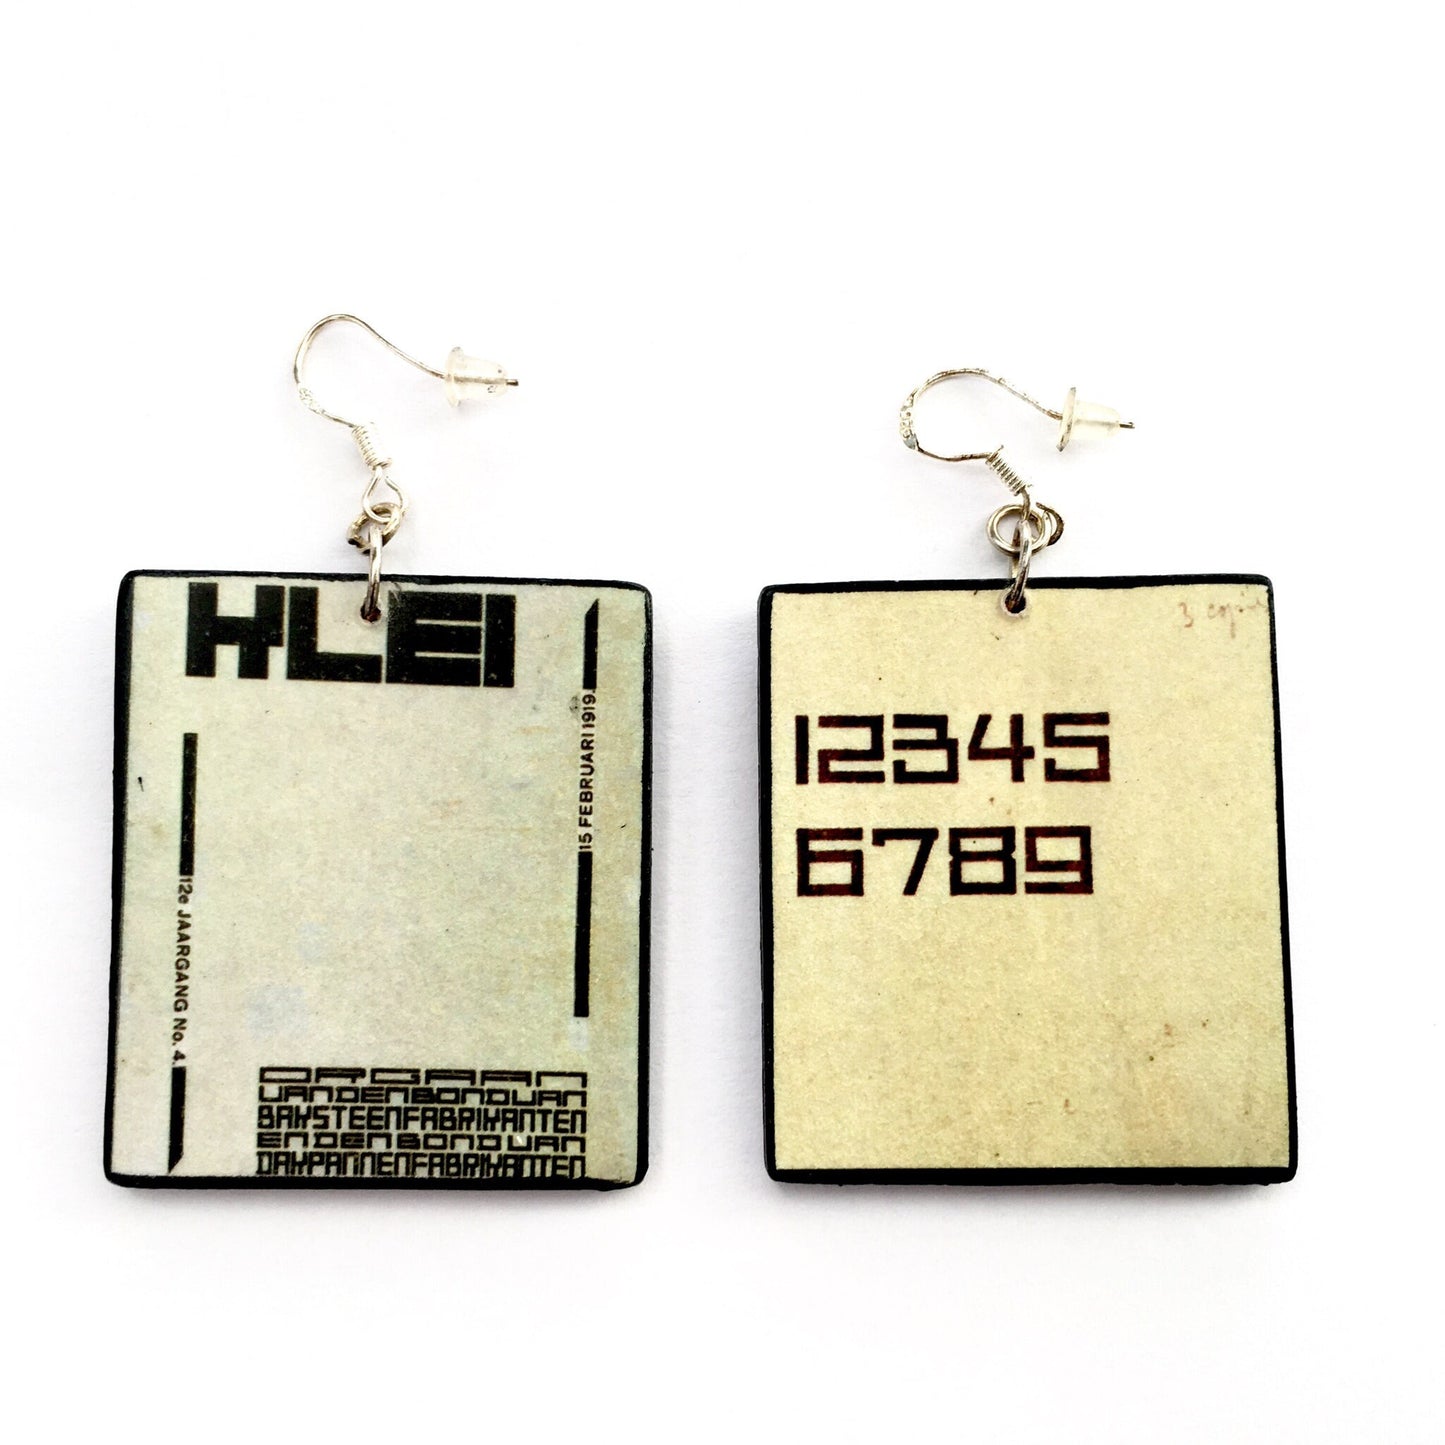 Handmade art earrings inspired by De Stijl art movement and his founded by Theo van Doesburg. Sustainable, mismatched earrings on wood with geometric, abstract art. Nunber 1 2 3 4 5 6 7 8 9 on top.